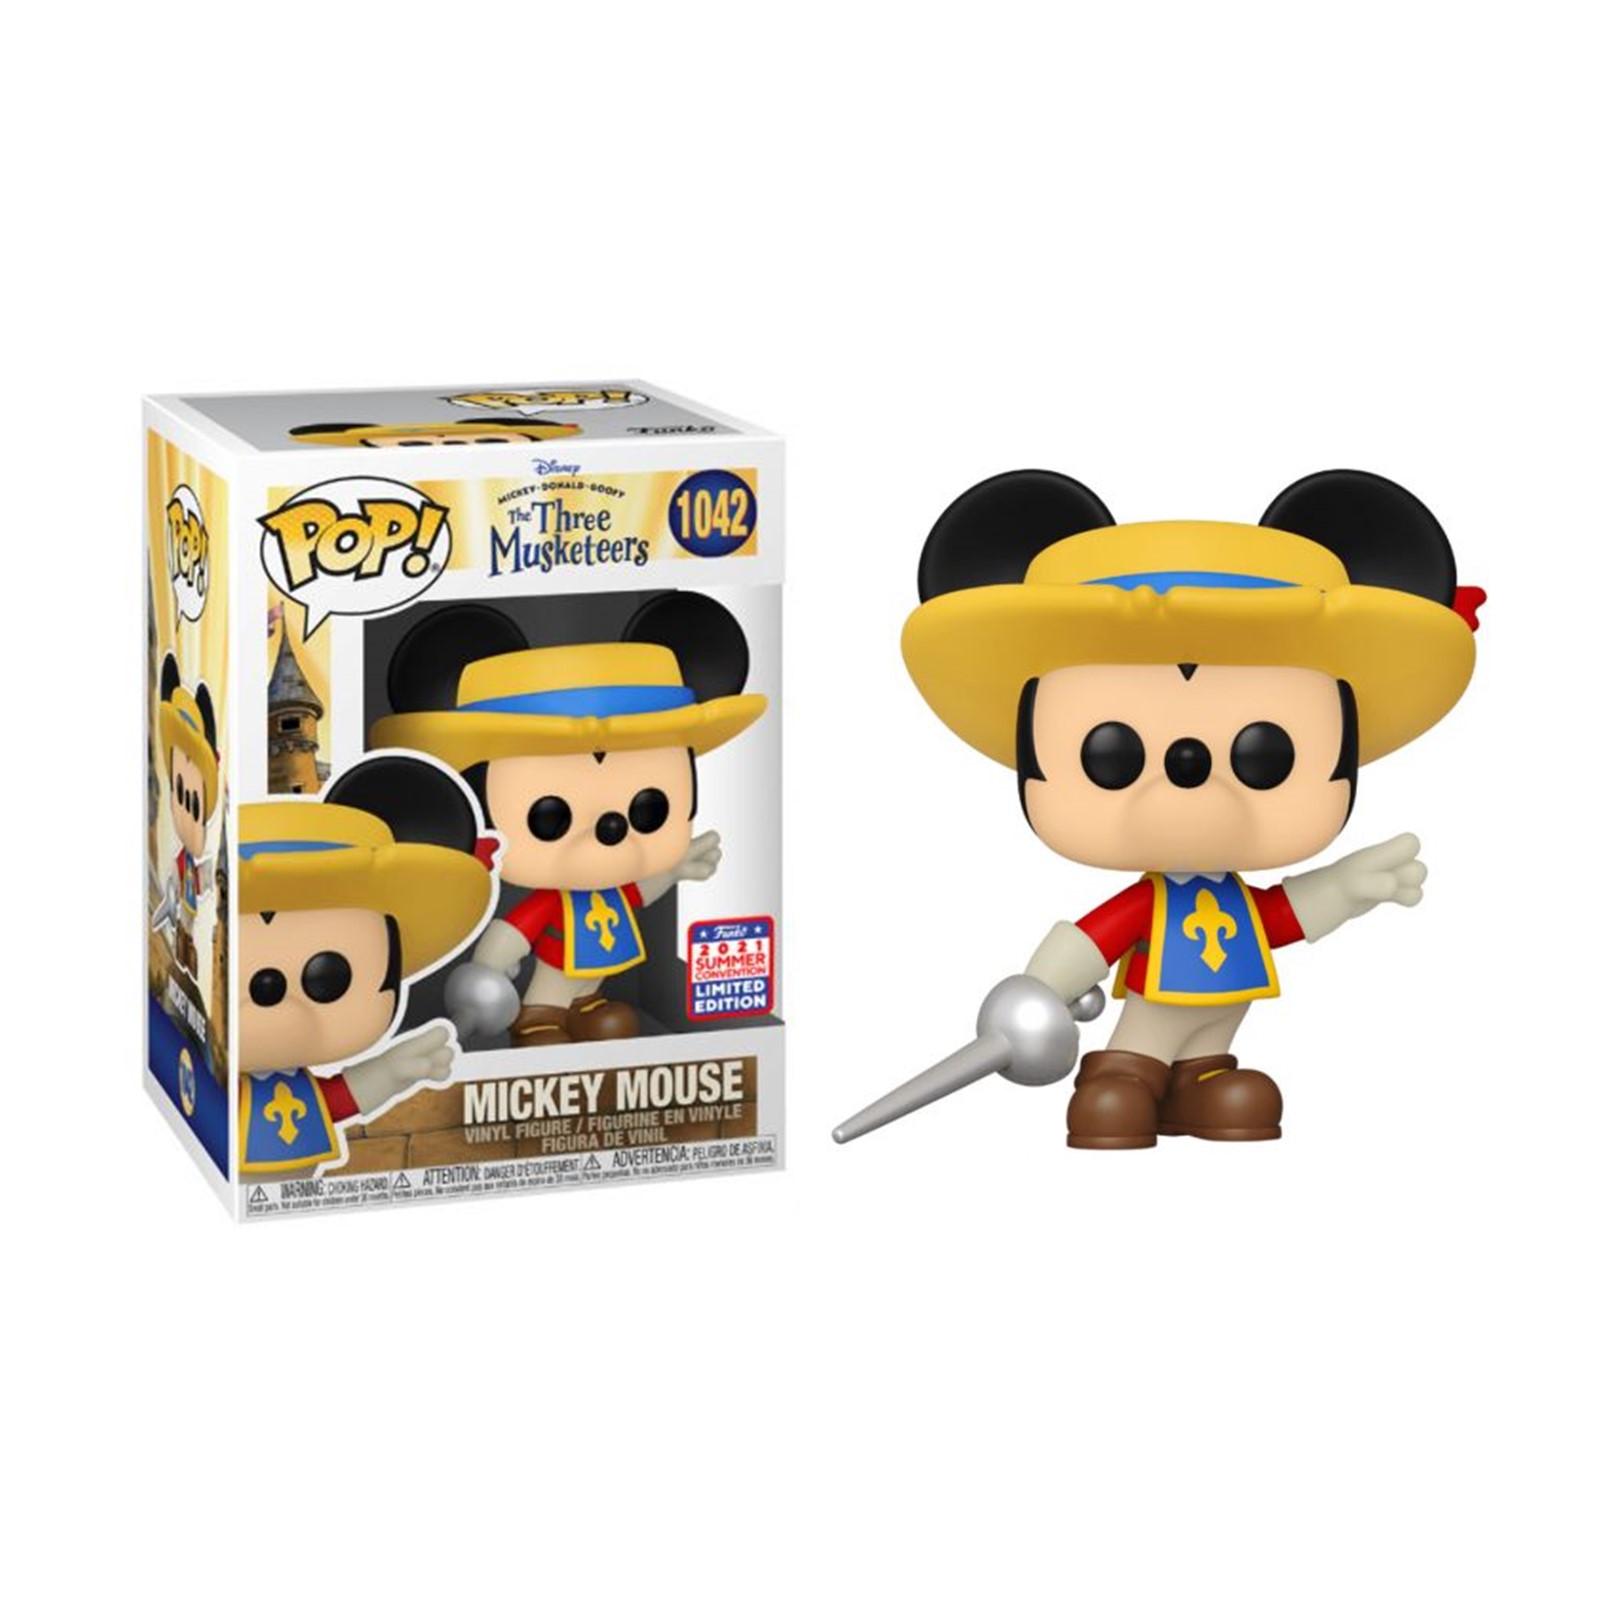 Funko Pop Disney Les 3 mousquetaires Mickey Mouse Convention – 1042